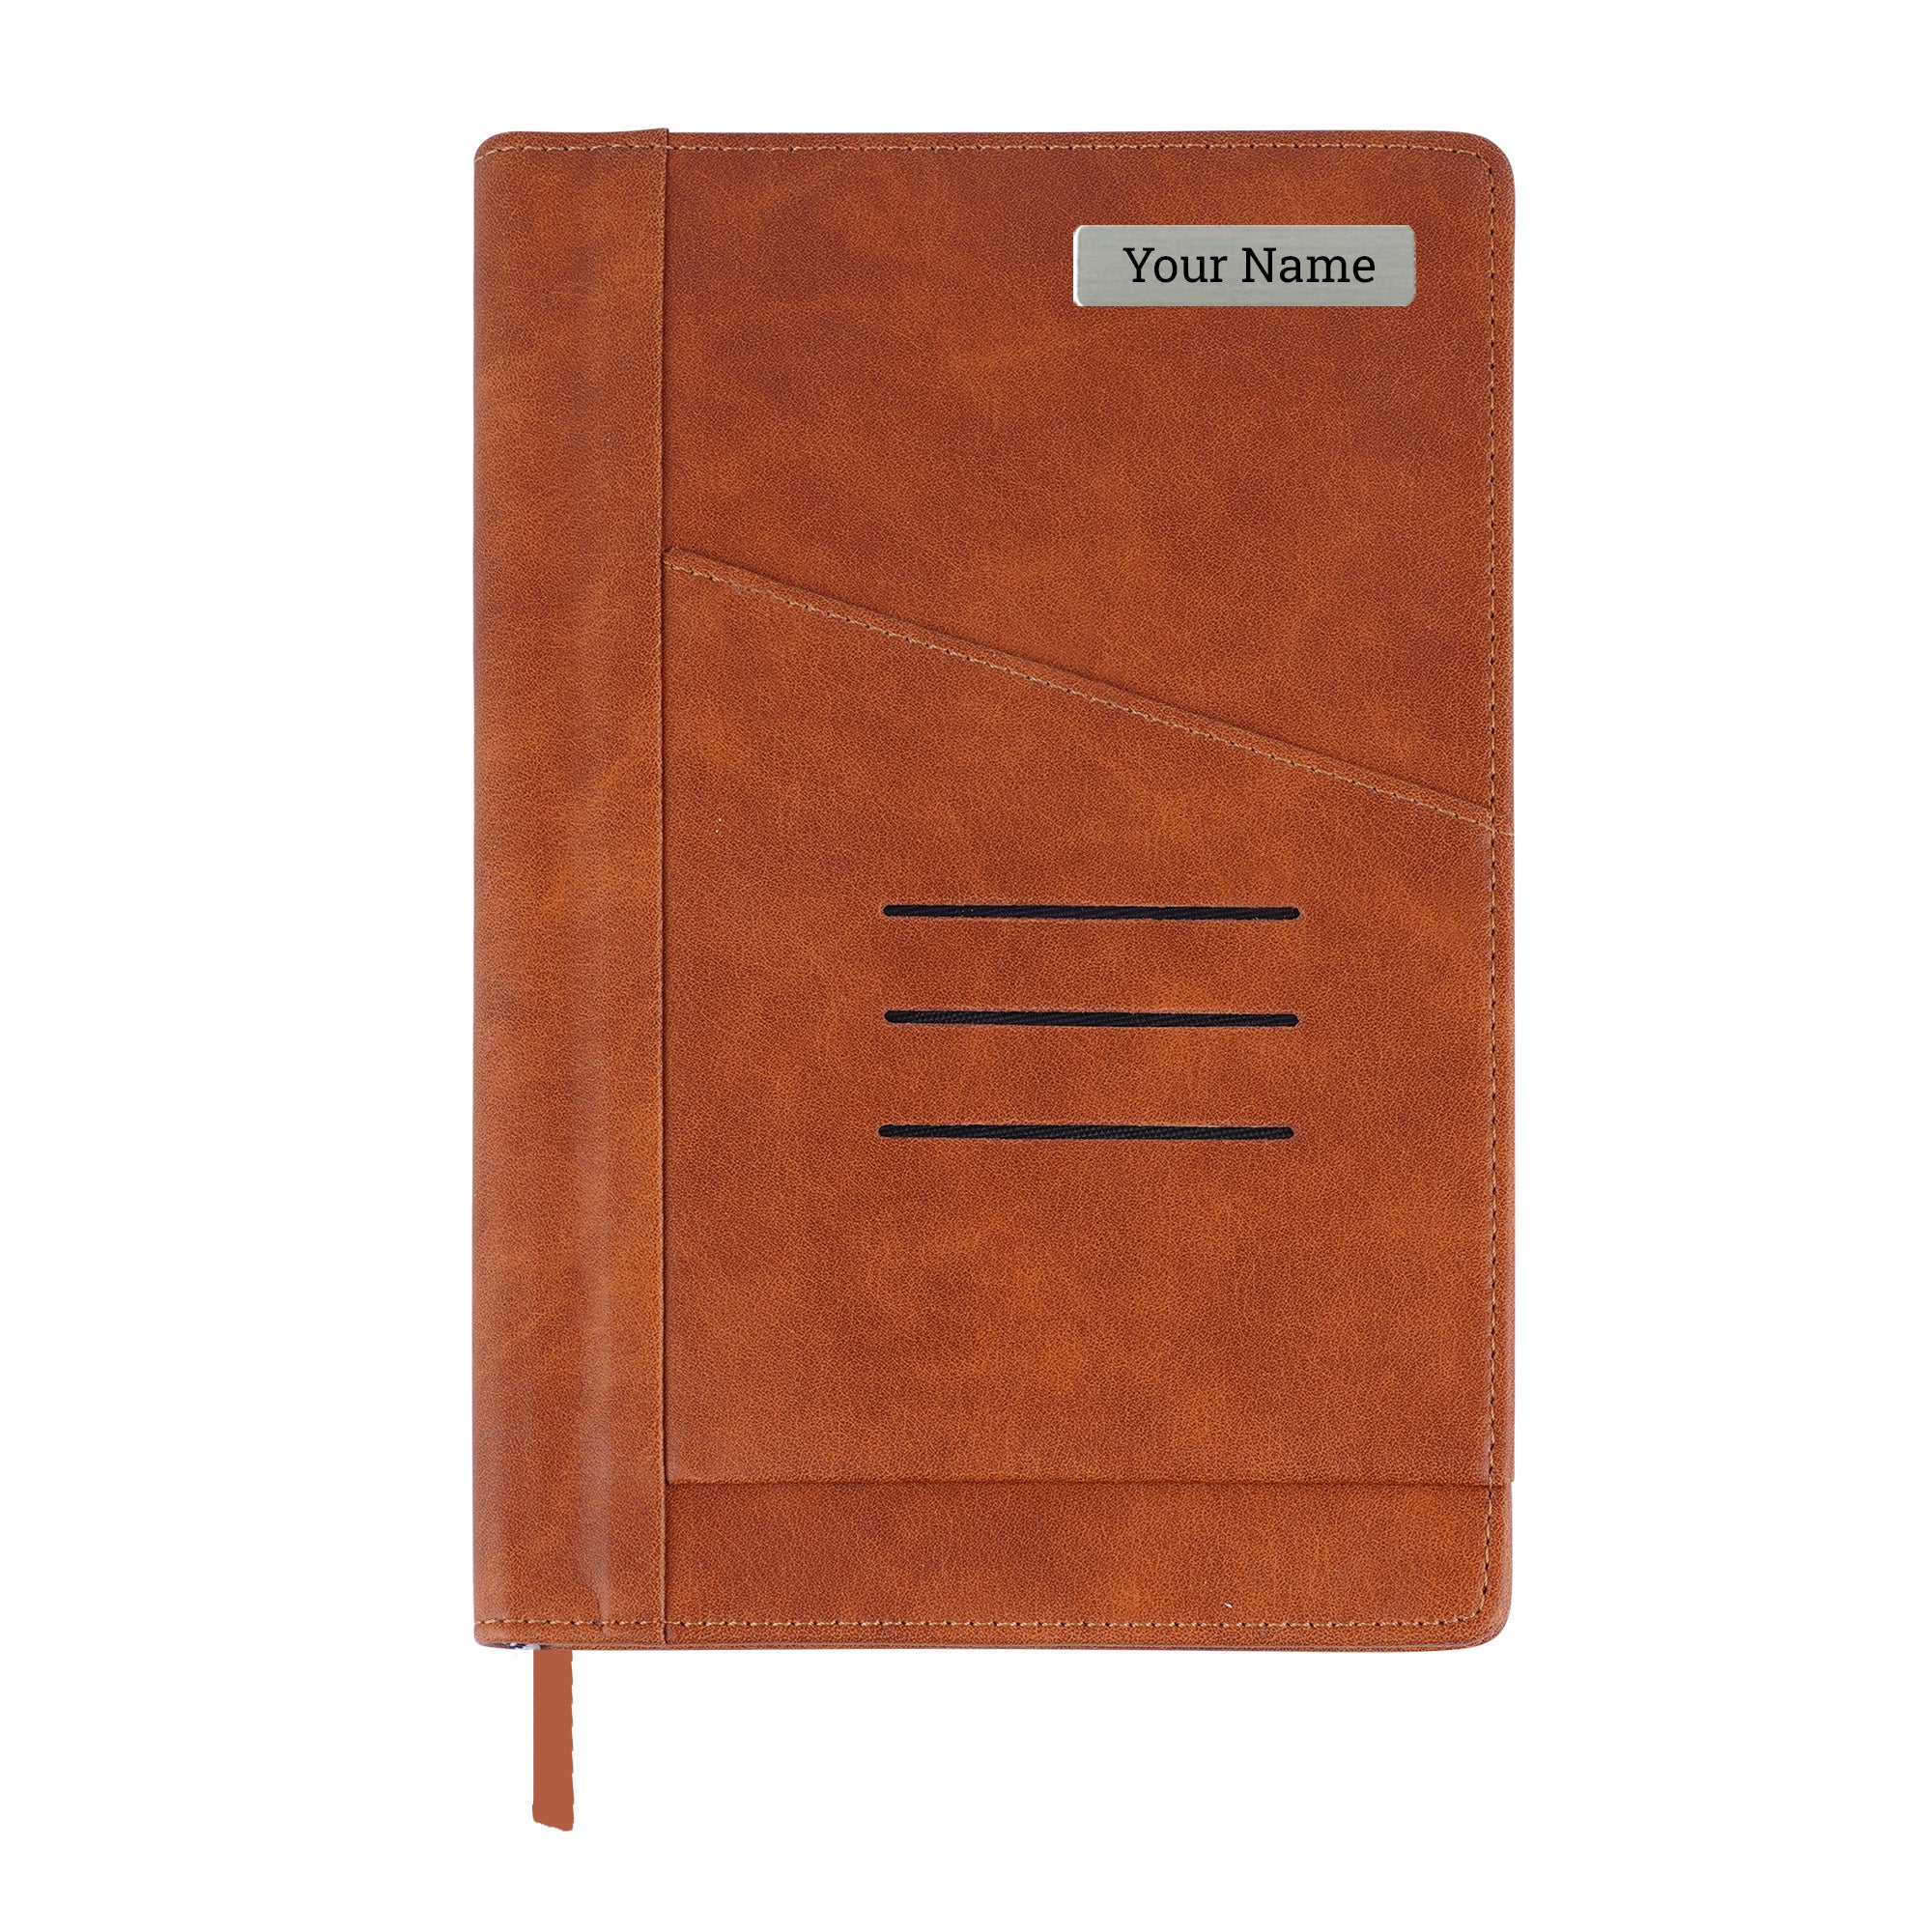 Personalized Graham A5 Hardbound Faux Leather Executive Notebook - Brown